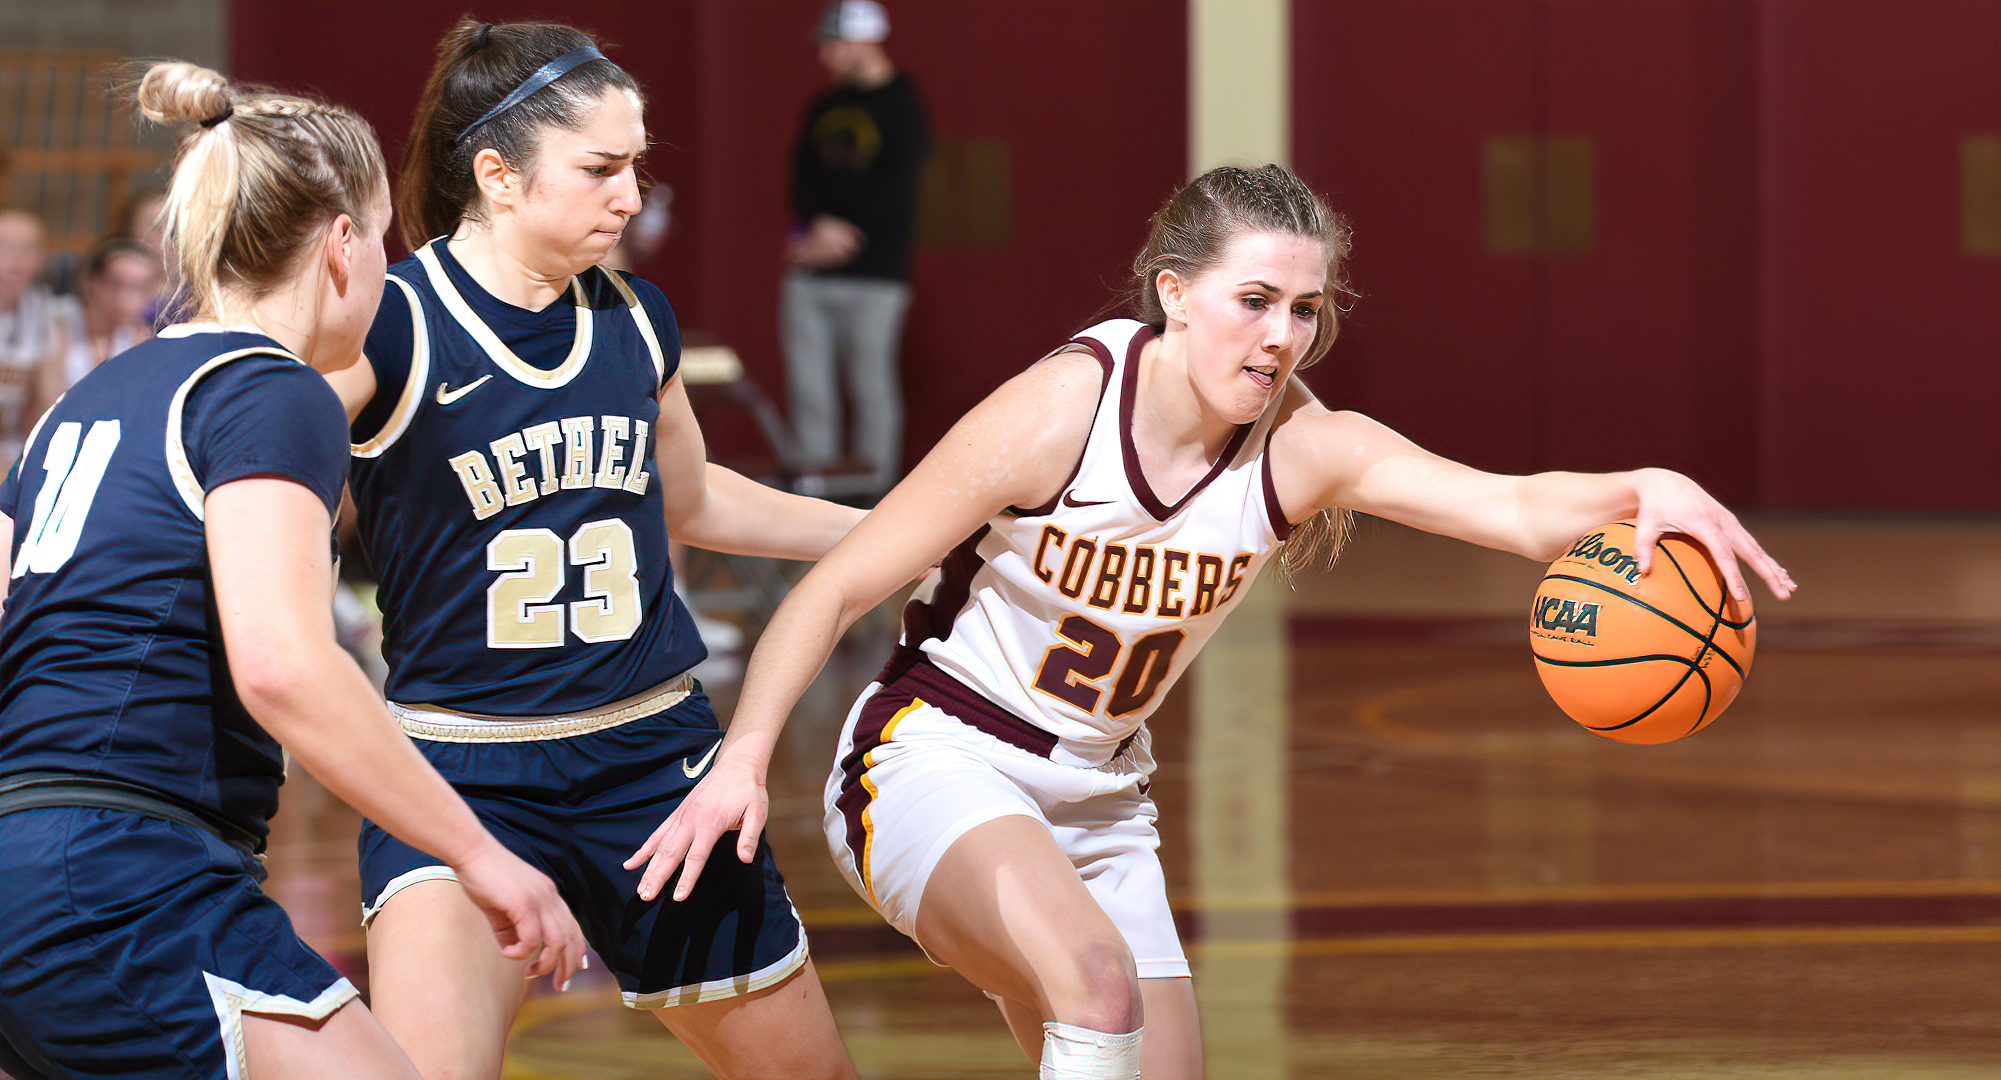 Emily Beseman had a game-high 16 points, five rebounds, four assists and four steals in the Cobbers' win at Bethel.